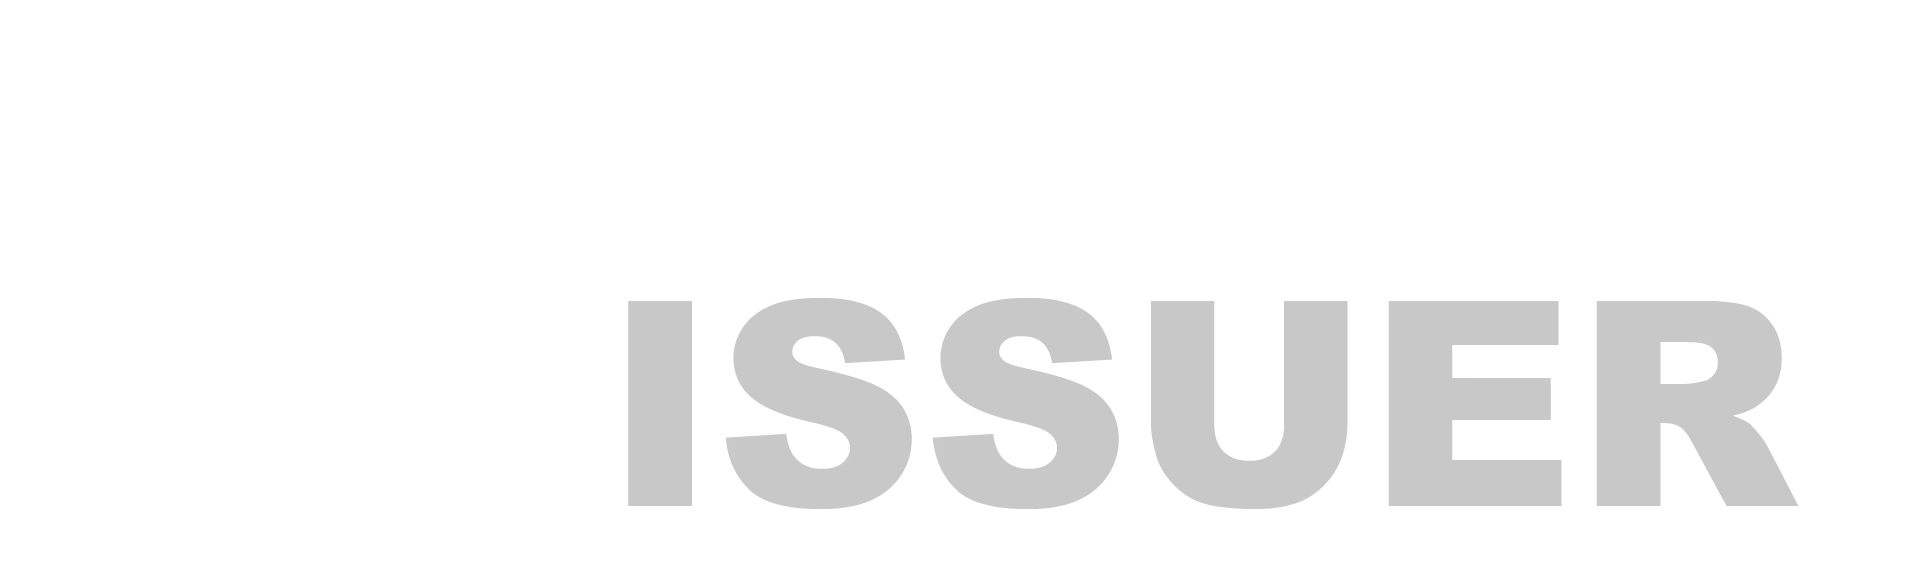 NordicVPS company logo with transparent background